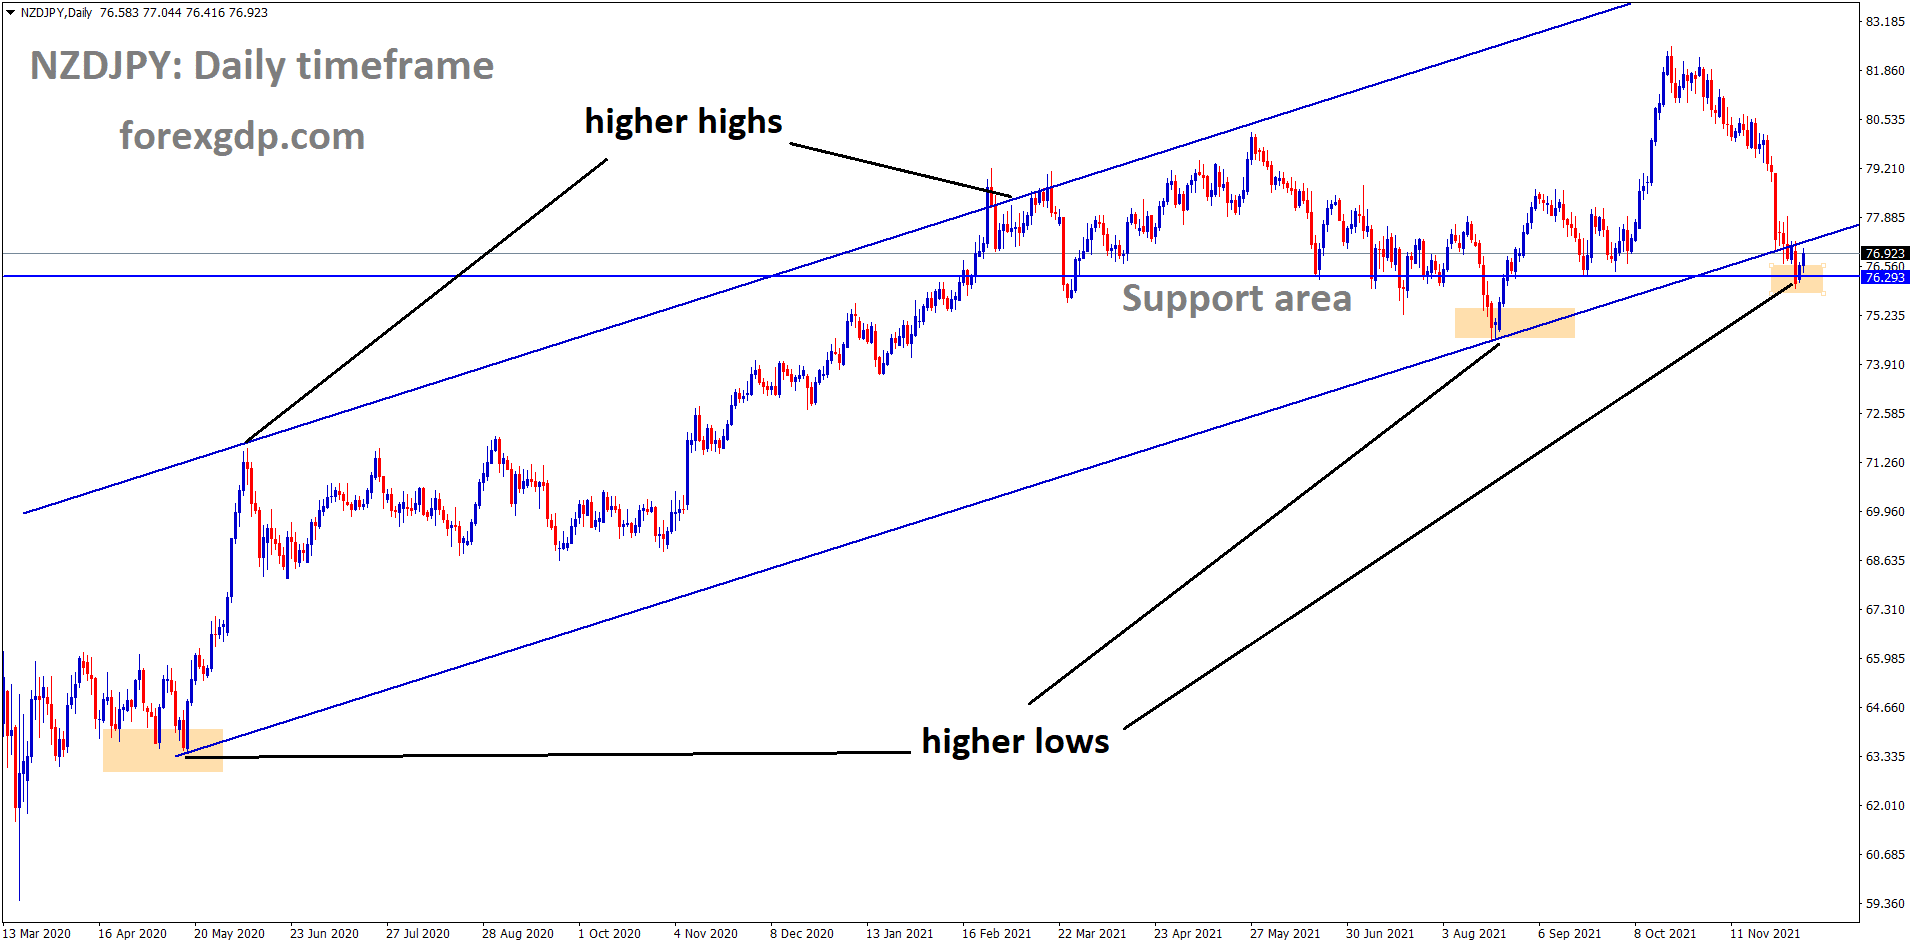 NZDJPY is moving in an Ascending channel and the market has rebounded from the Horizontal support area and higher area of the channel